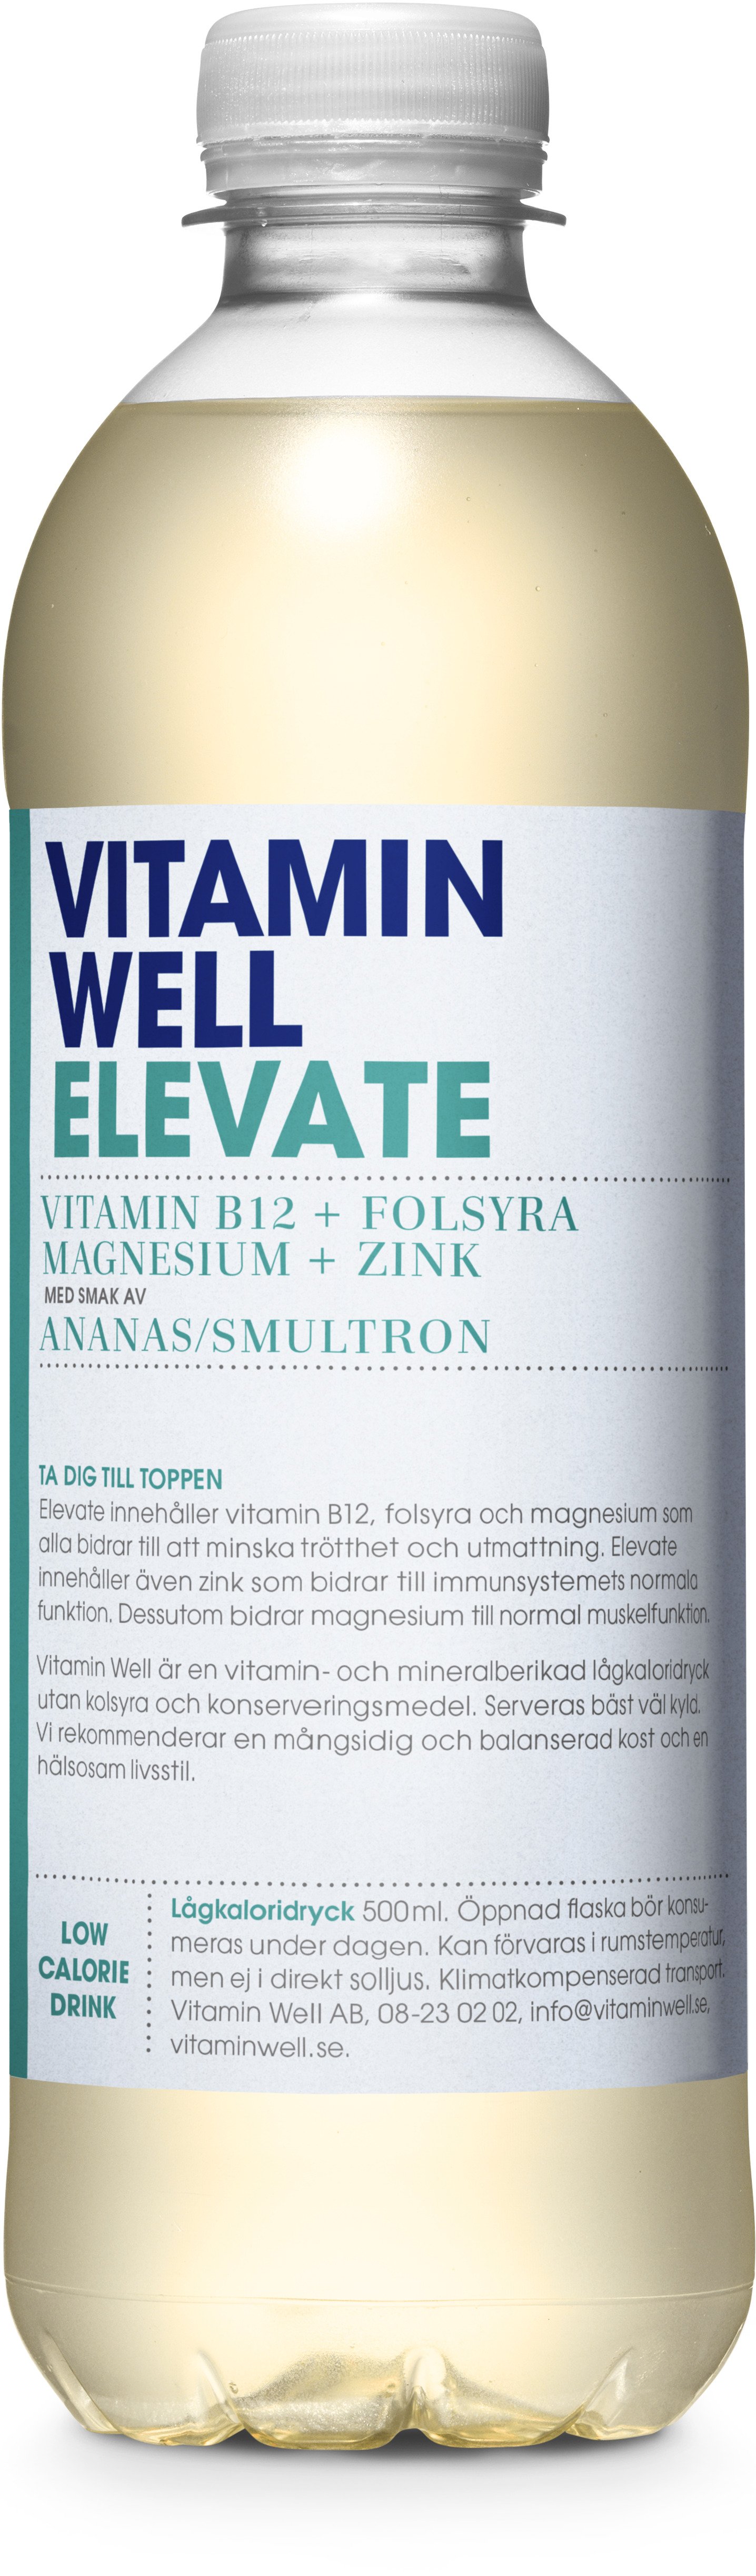 Vitamin Well Elevate Ananas & Smultron 500 ml